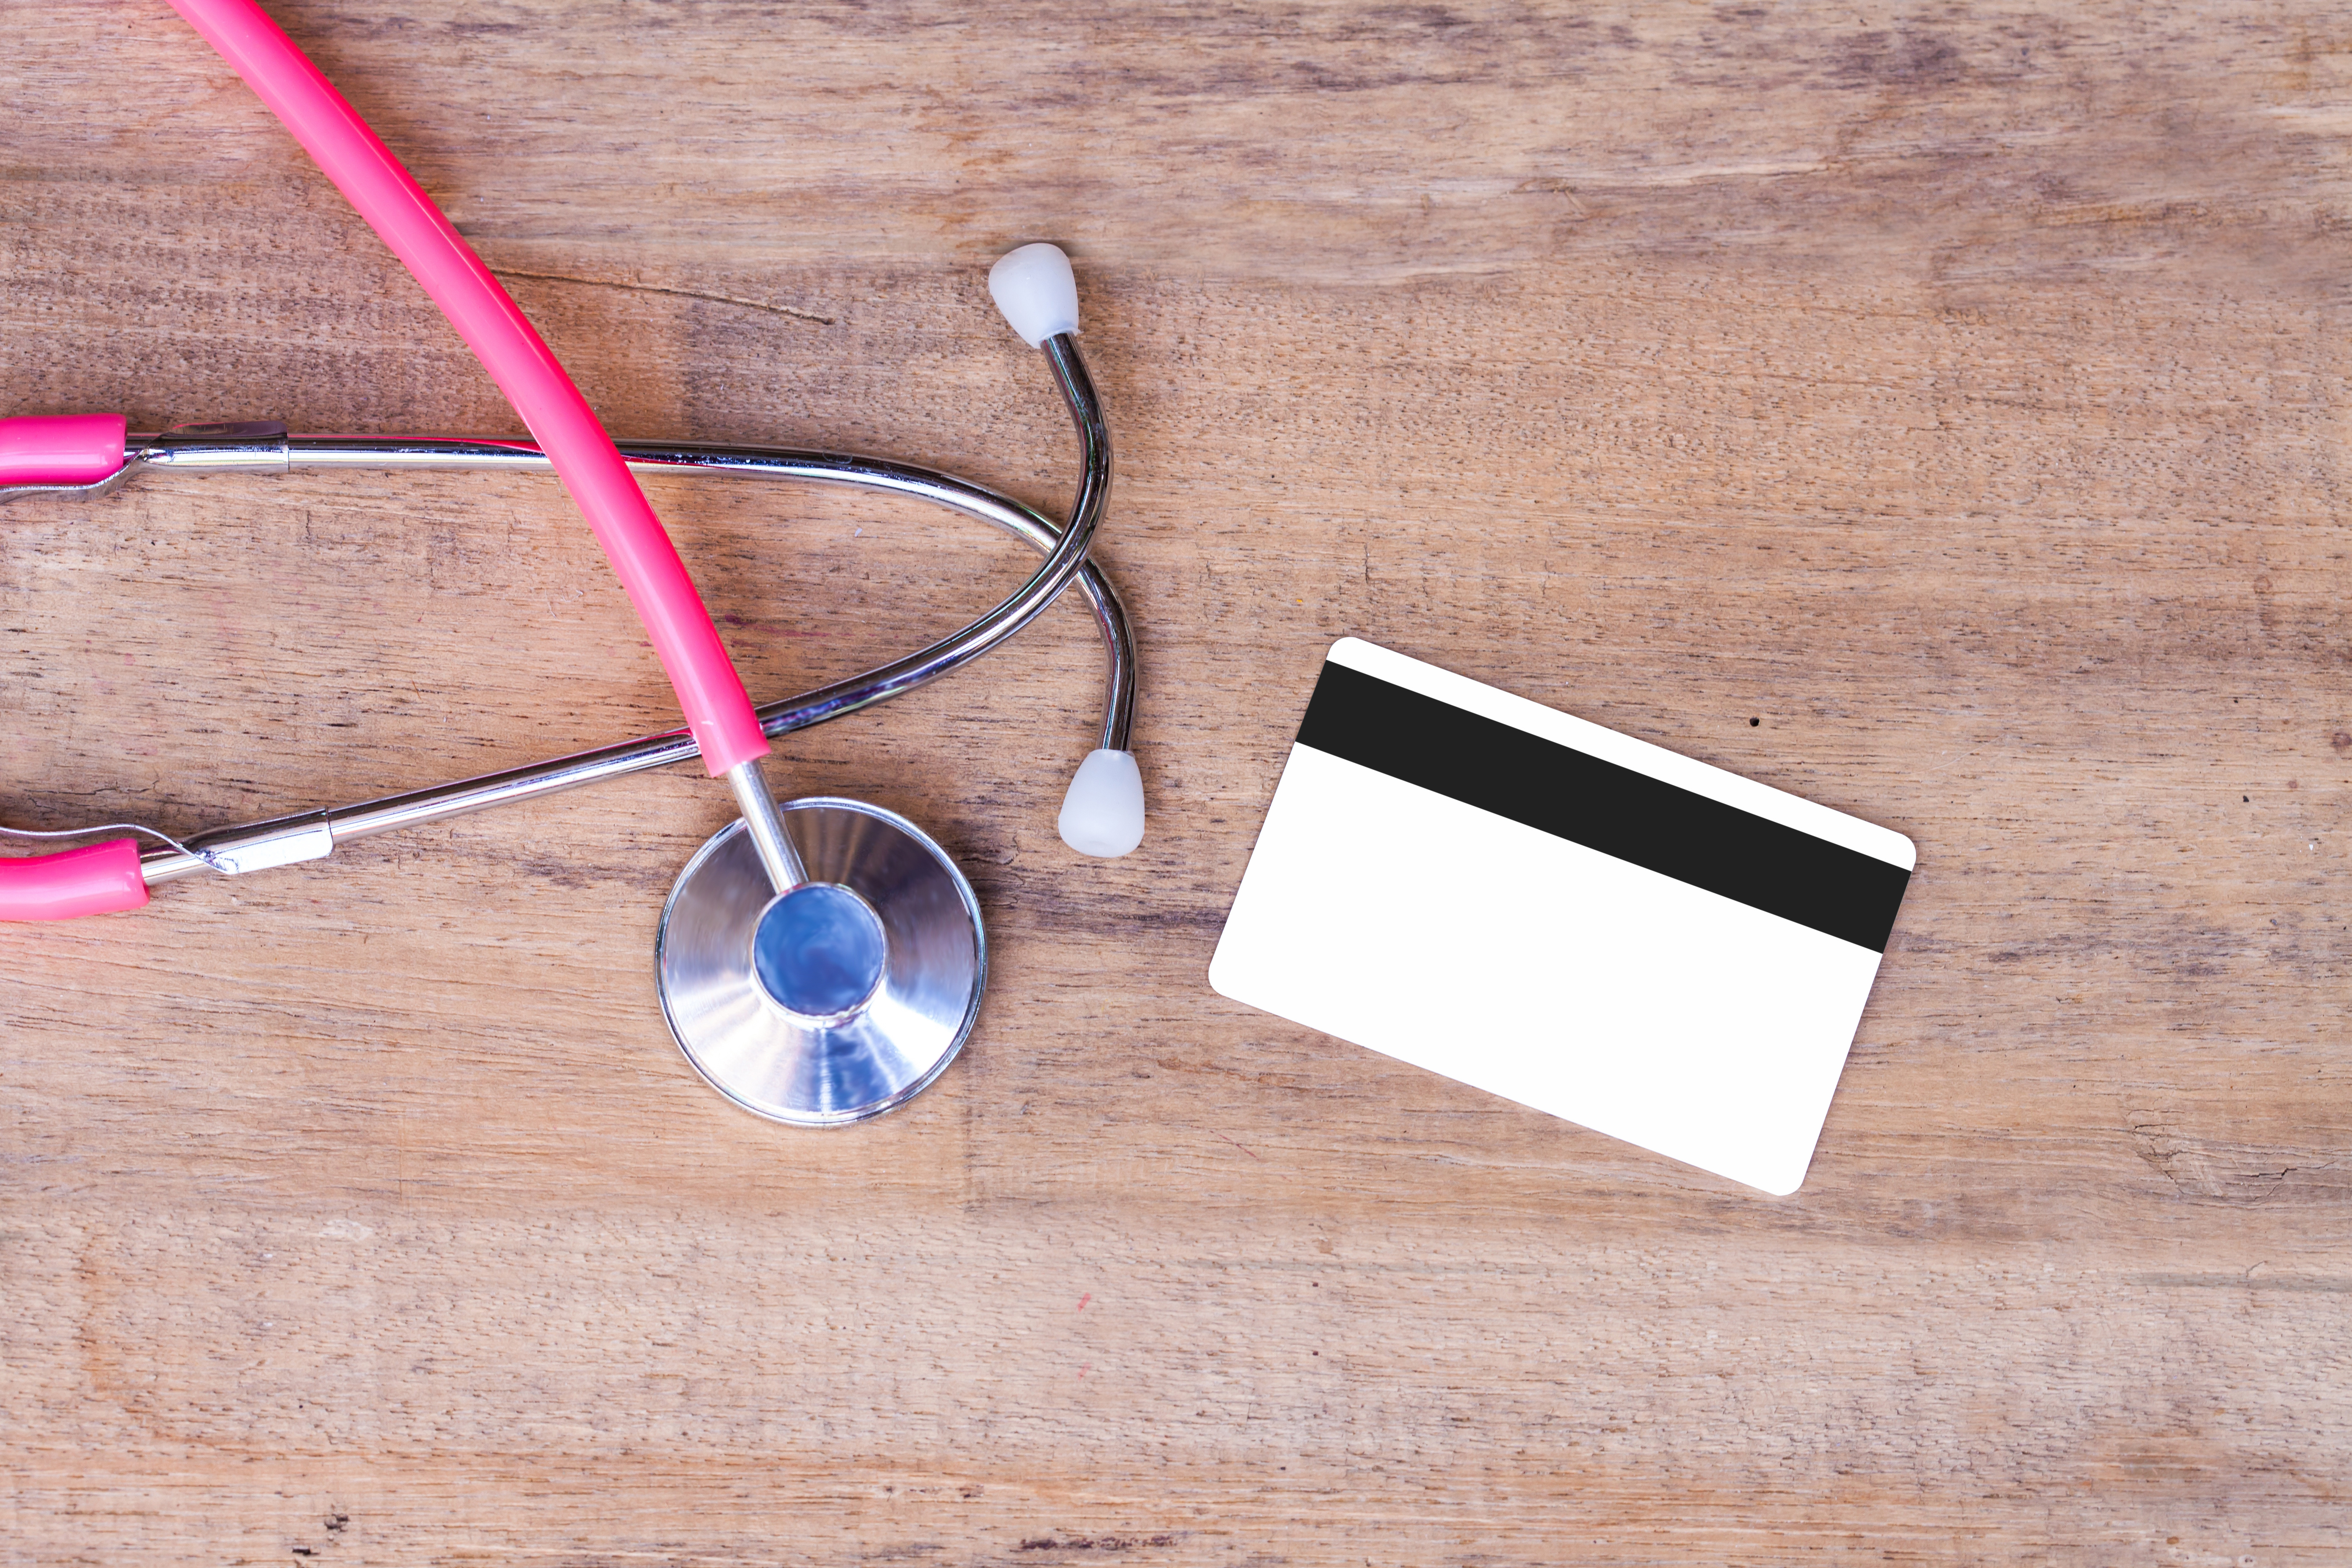 Learn what a medical credit card is. Source: AdobeStock.